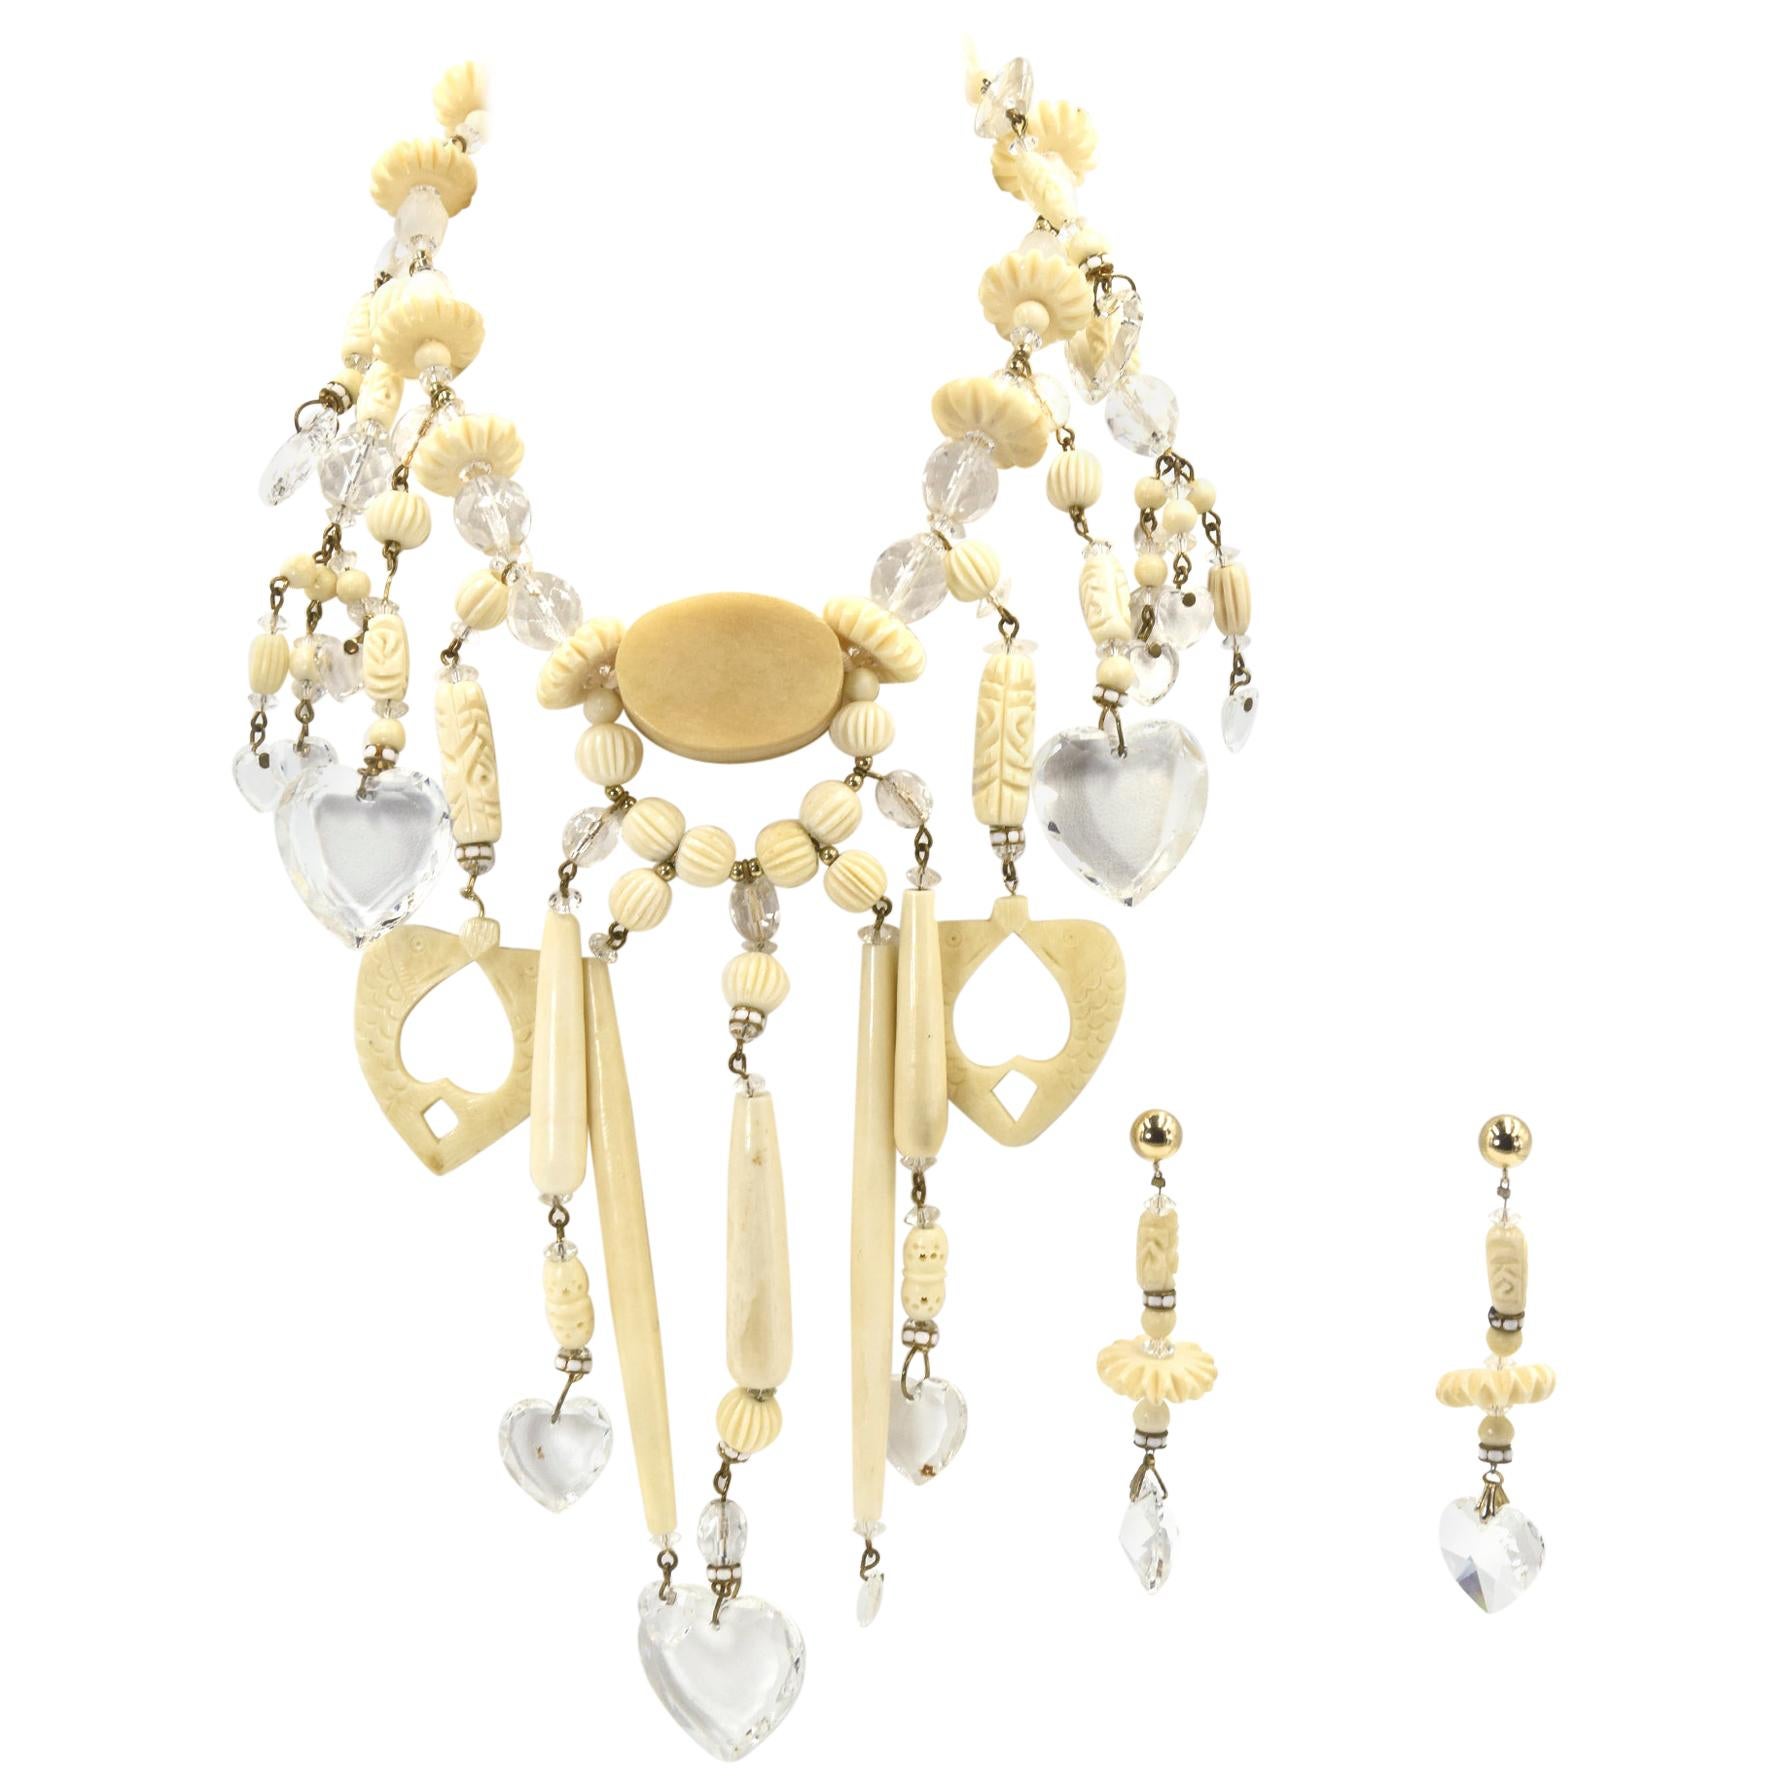 Bohemian Chic Carved Bone and Lucite Hearts Bib Necklace with Dangling Earrings 